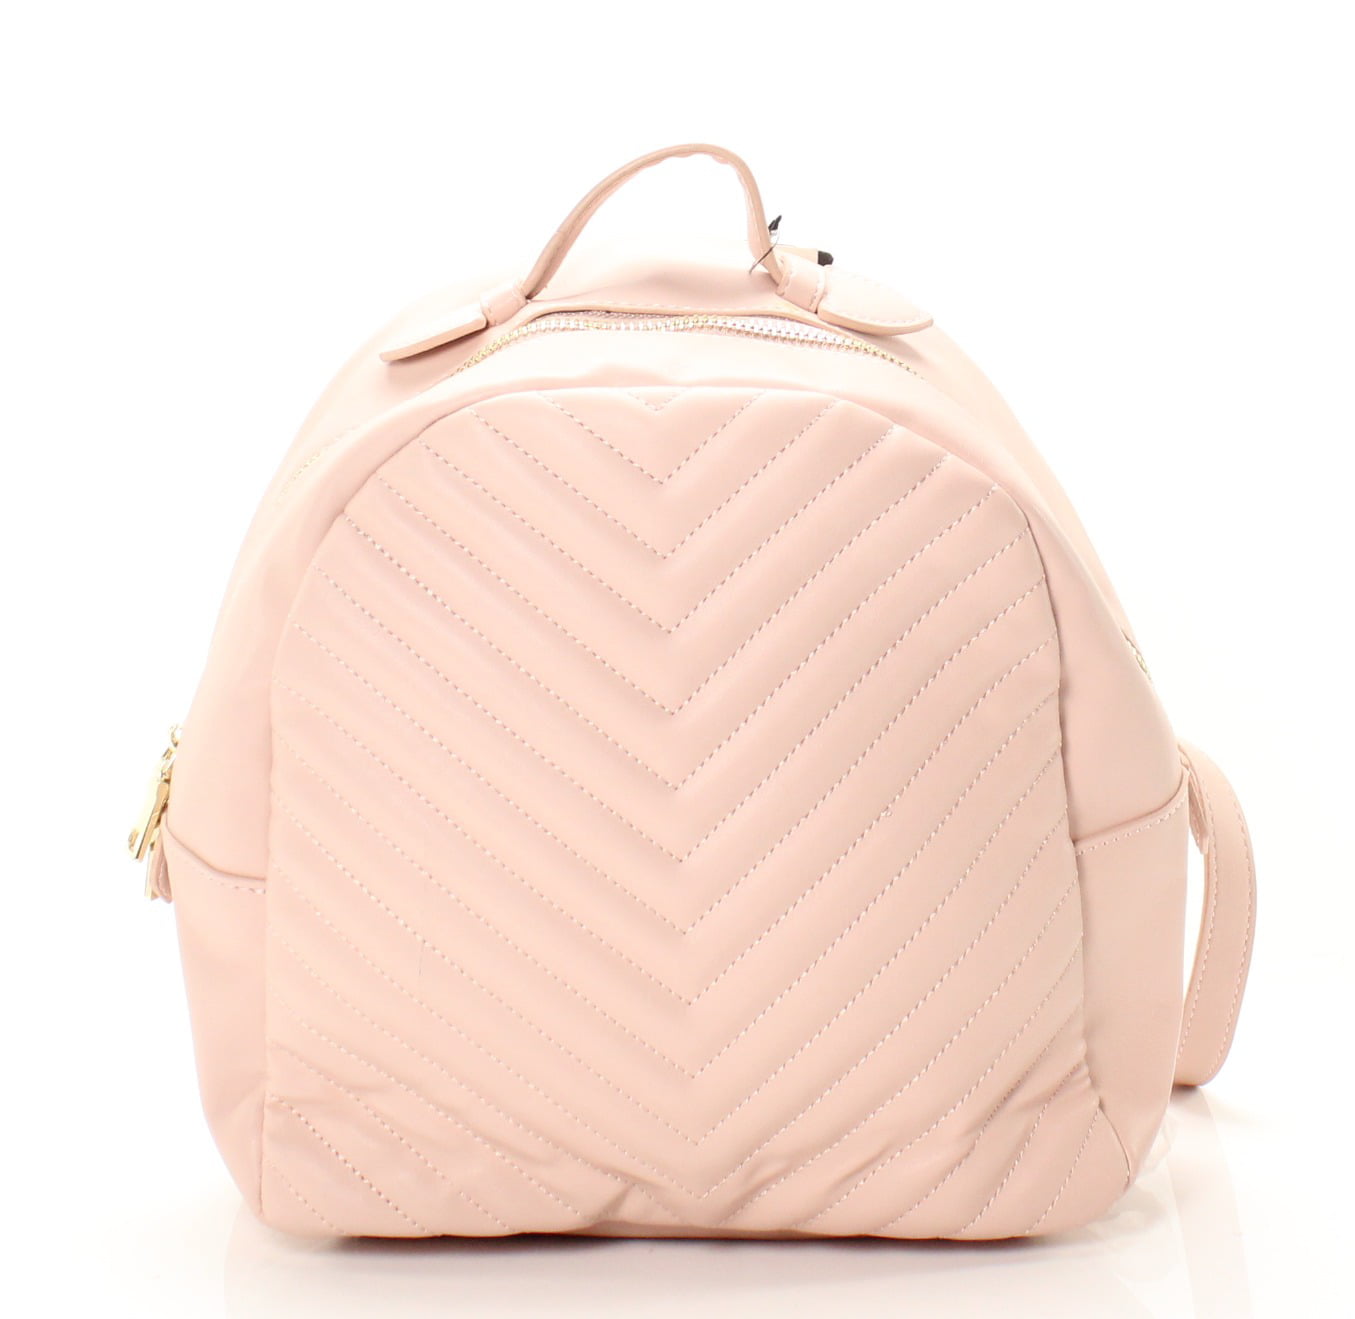 Steve Madden Handbags & Purses - Blush Gold Josie Faux Leather Quilted ...